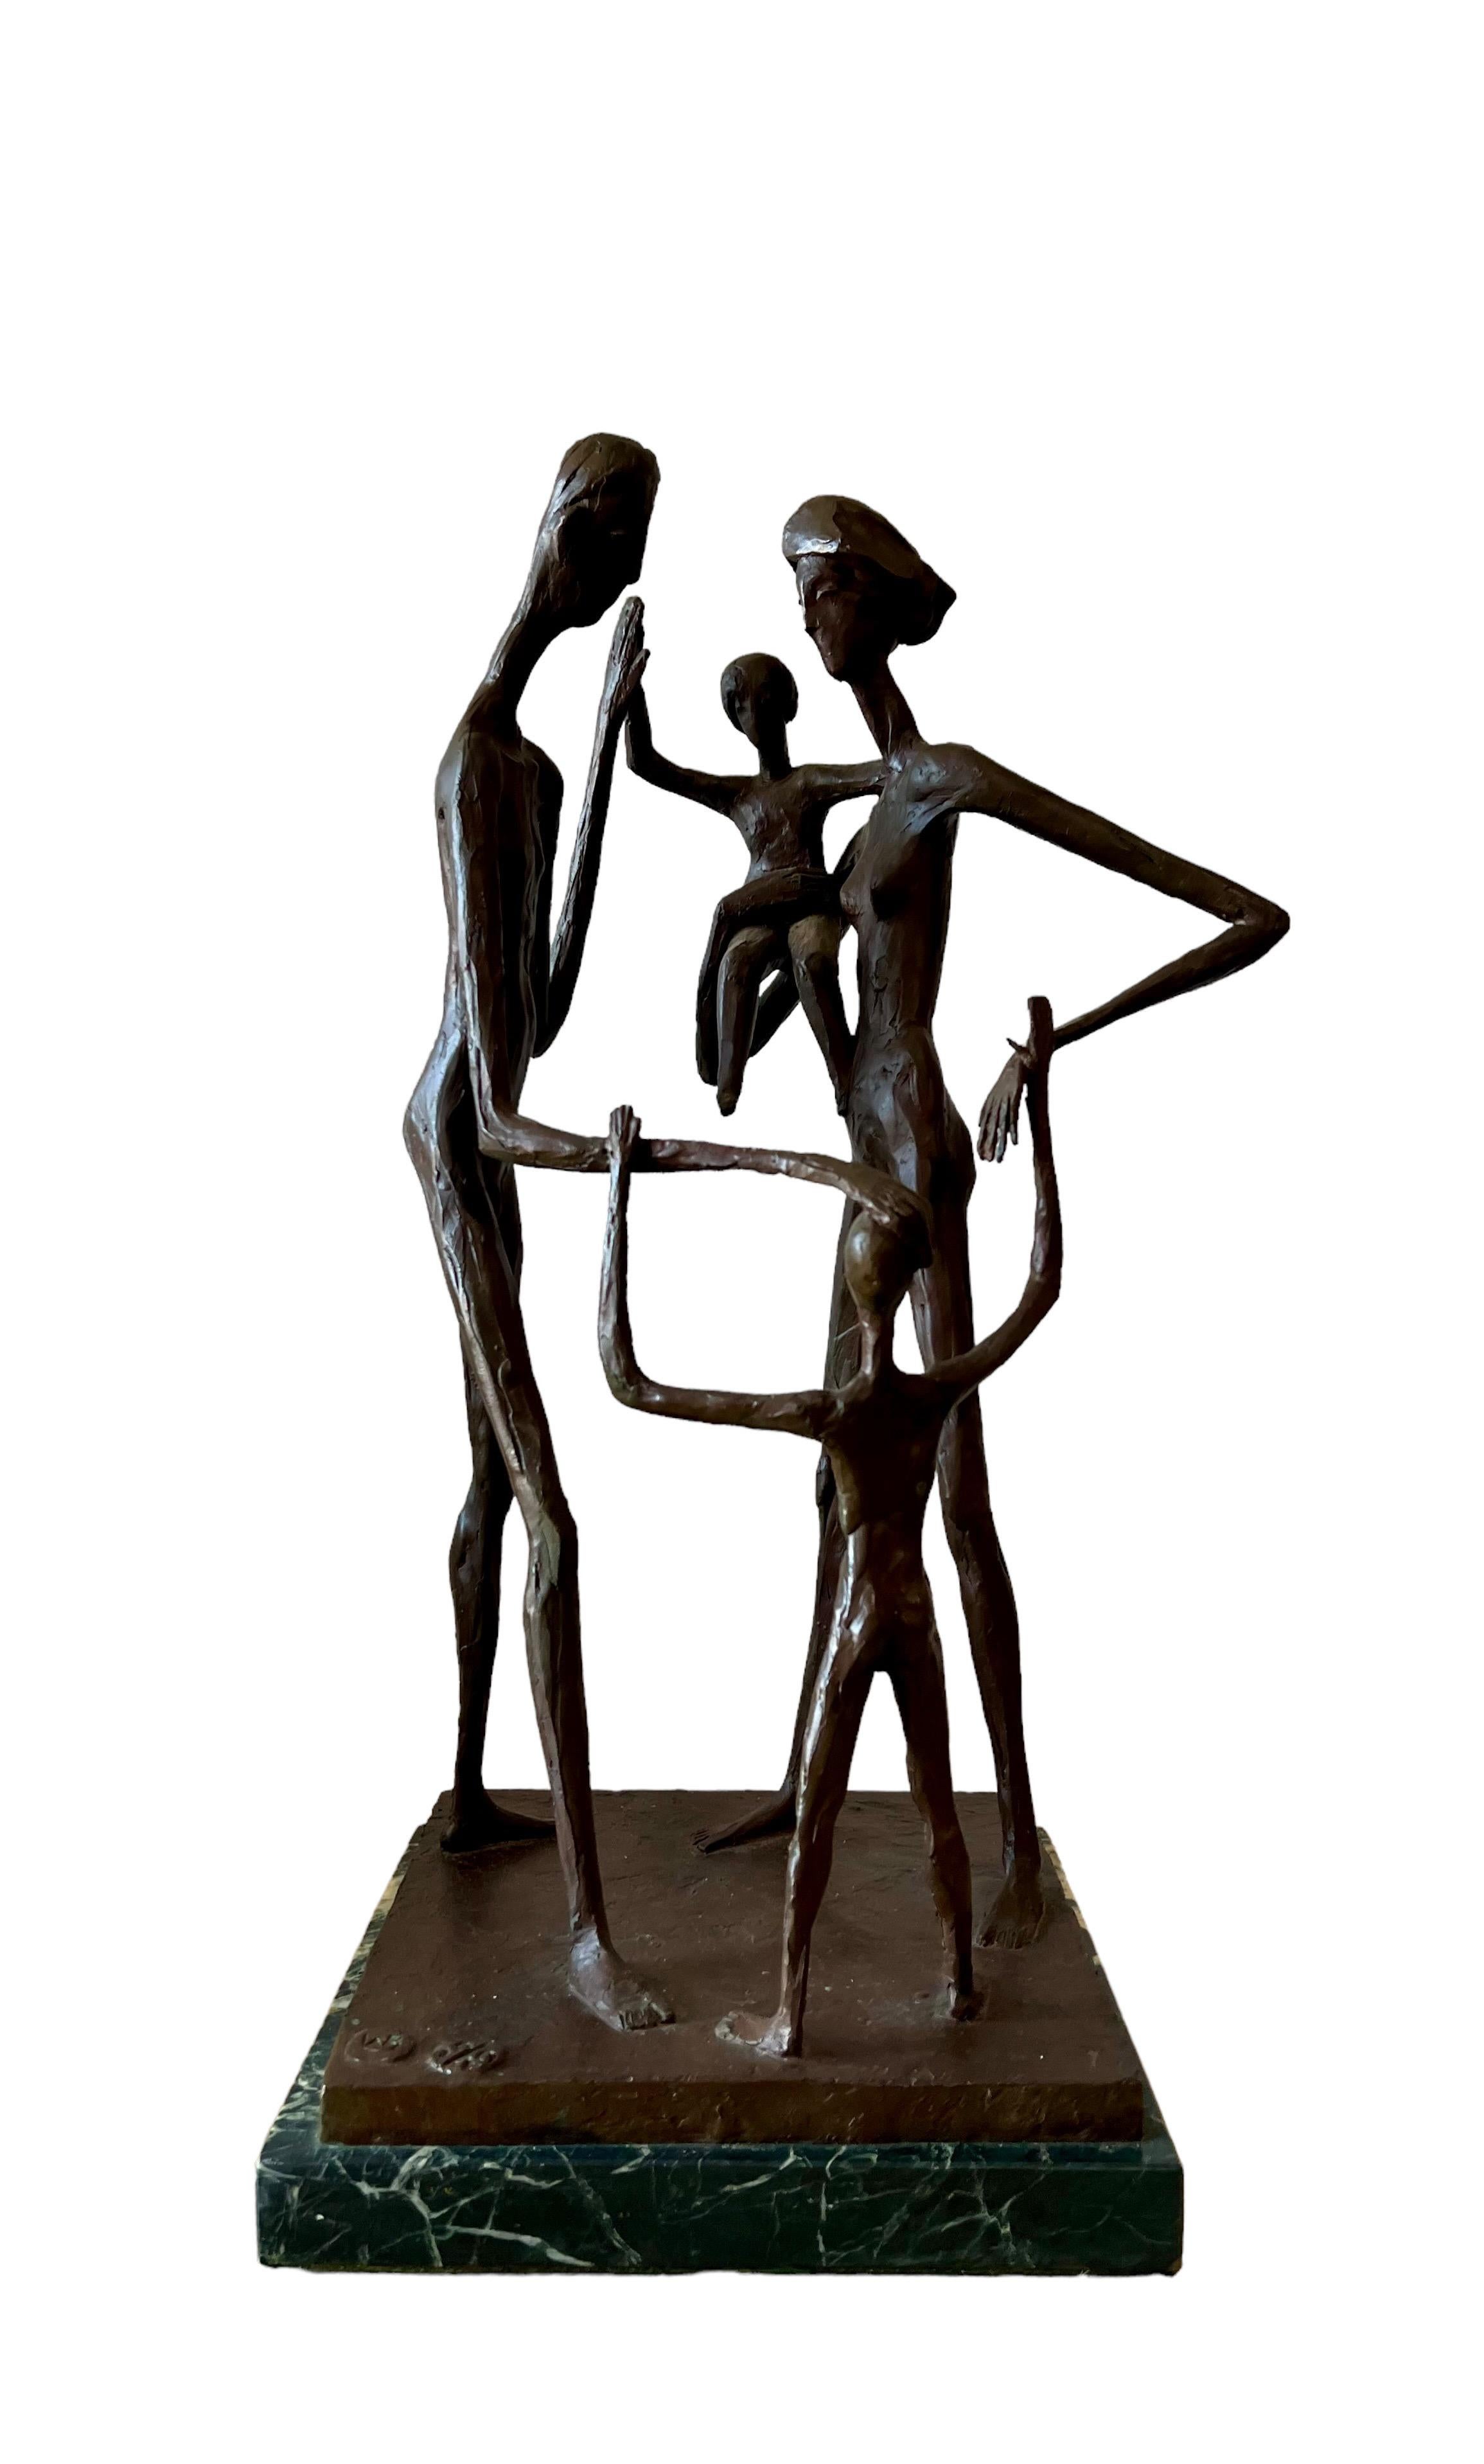 family of 3 sculpture